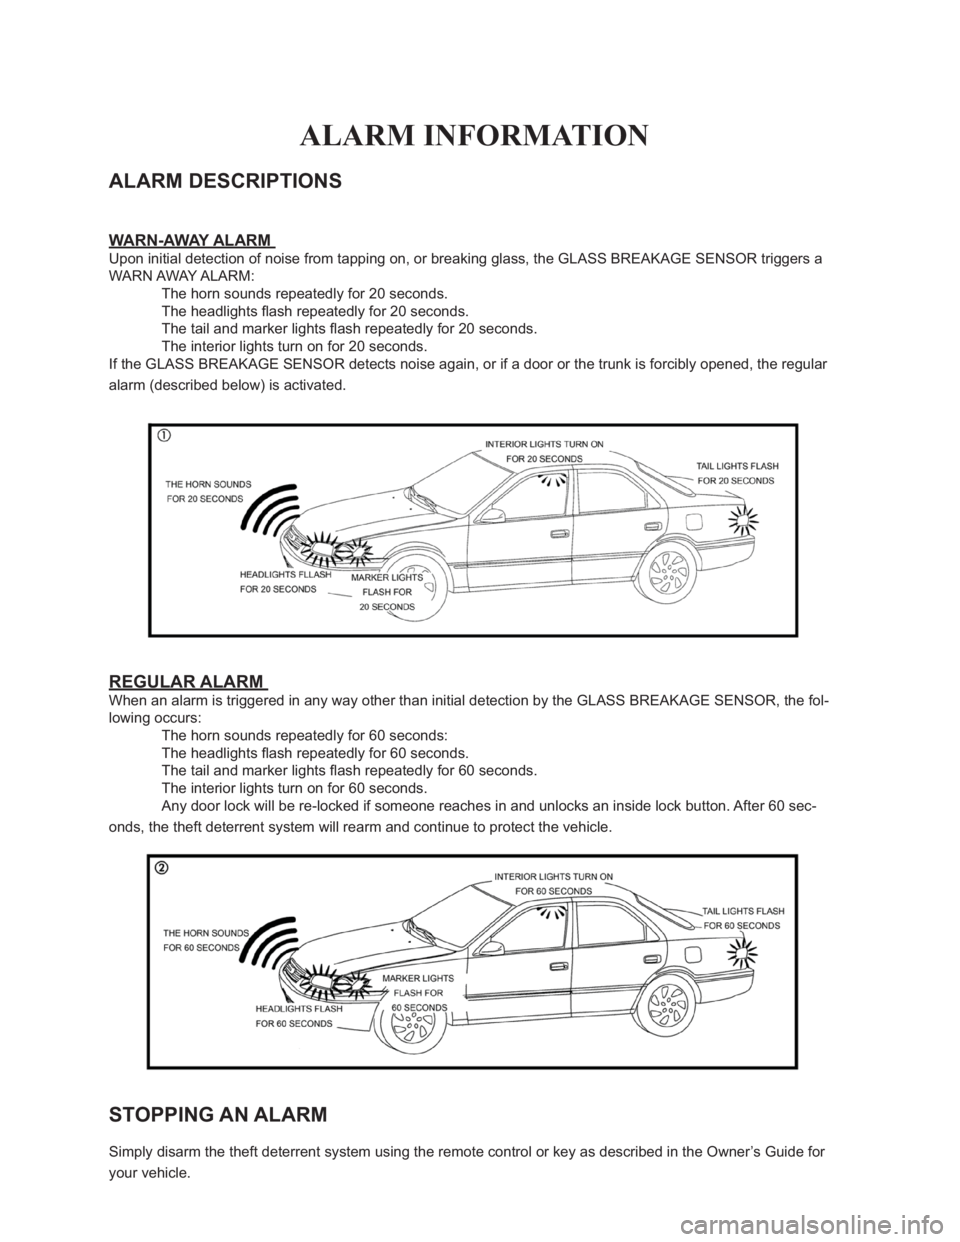 TOYOTA SOLARA 2008  Accessories, Audio & Navigation (in English) 
ALARM INFORMATION
ALARM DESCRIPTIONS 
WARN-AWAY ALARM 
Upon initial detection of noise from tapping on, or breaking glass, the GLASS BREAKAGE SENSOR triggers a 
WARN AWAY ALARM: 
� �7�K�H��K�R�U�Q�